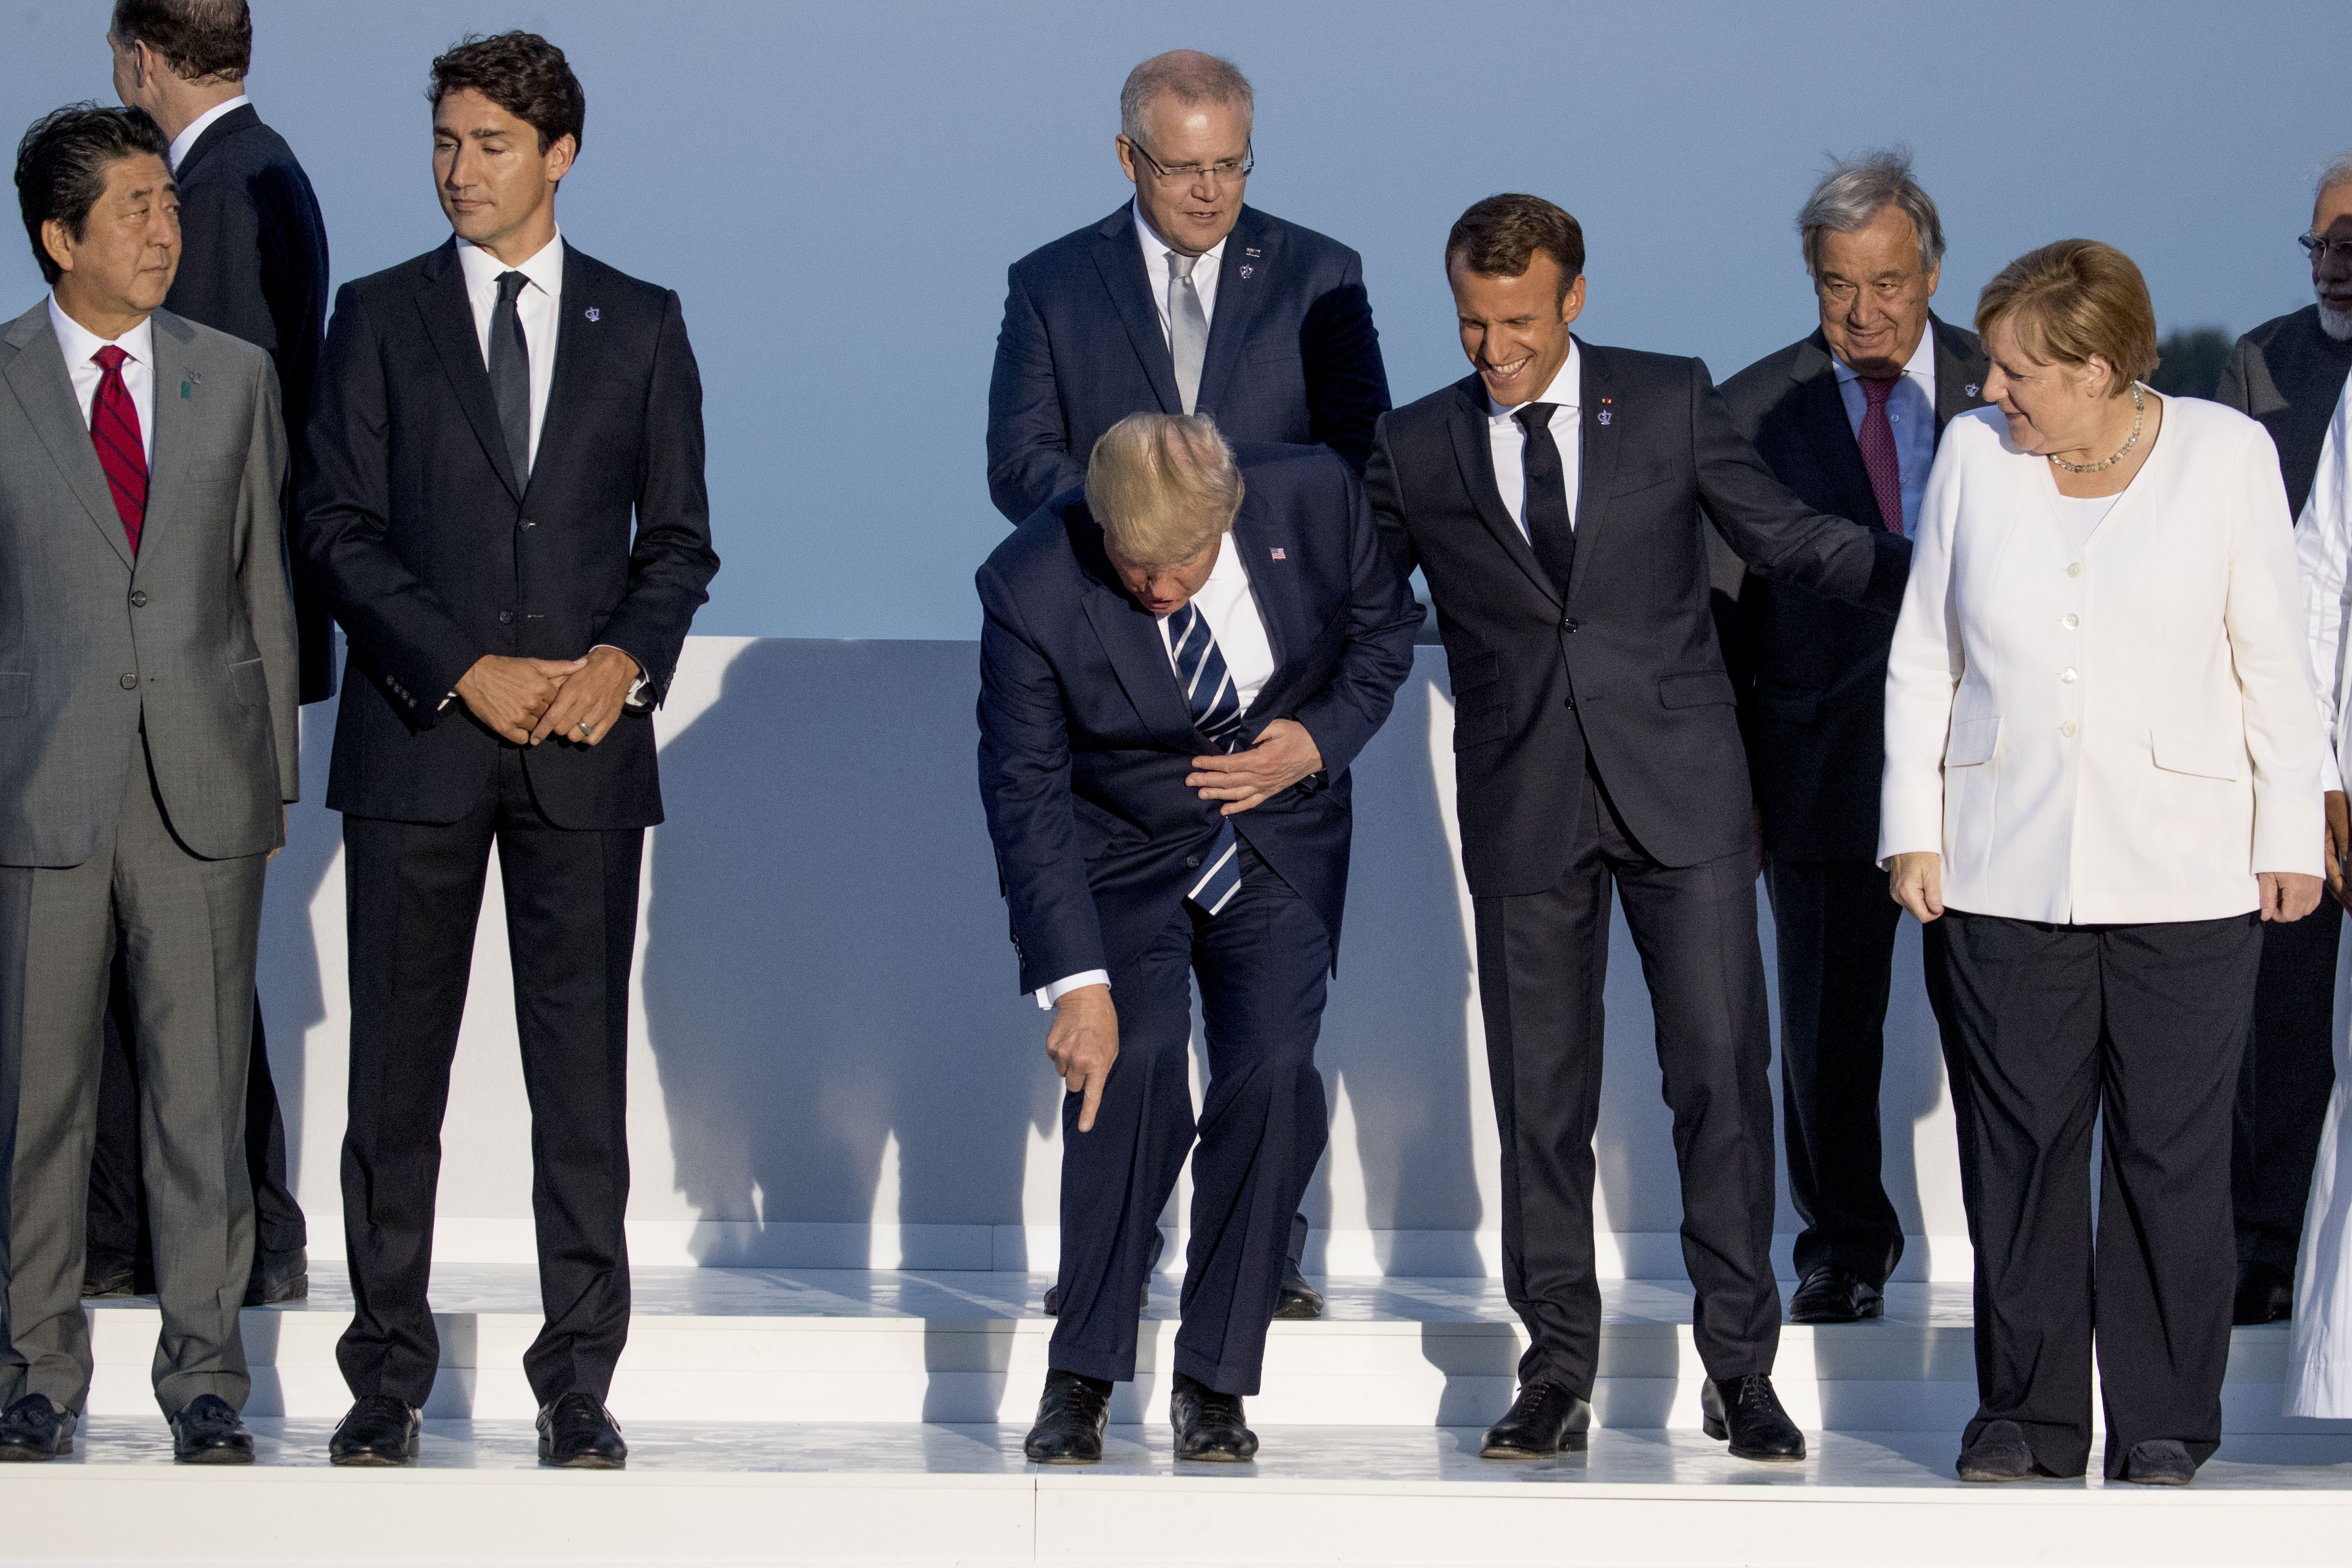 From left:  Japanese Prime Minister Shinzo Abe, Canadian Prime Minister Justin Trudeau, President Donald Trump, French President Emmanuel Macron, German Chancellor Angela Merkel, and others arrive for the G-7 family photo with guests at the G-7 summit at the Hotel du Palais in Biarritz, France, Sunday, Aug. 25, 2019. Also pictured is Indian Prime Minister Narendra Modi, right. (AP Photo/Andrew Harnik)